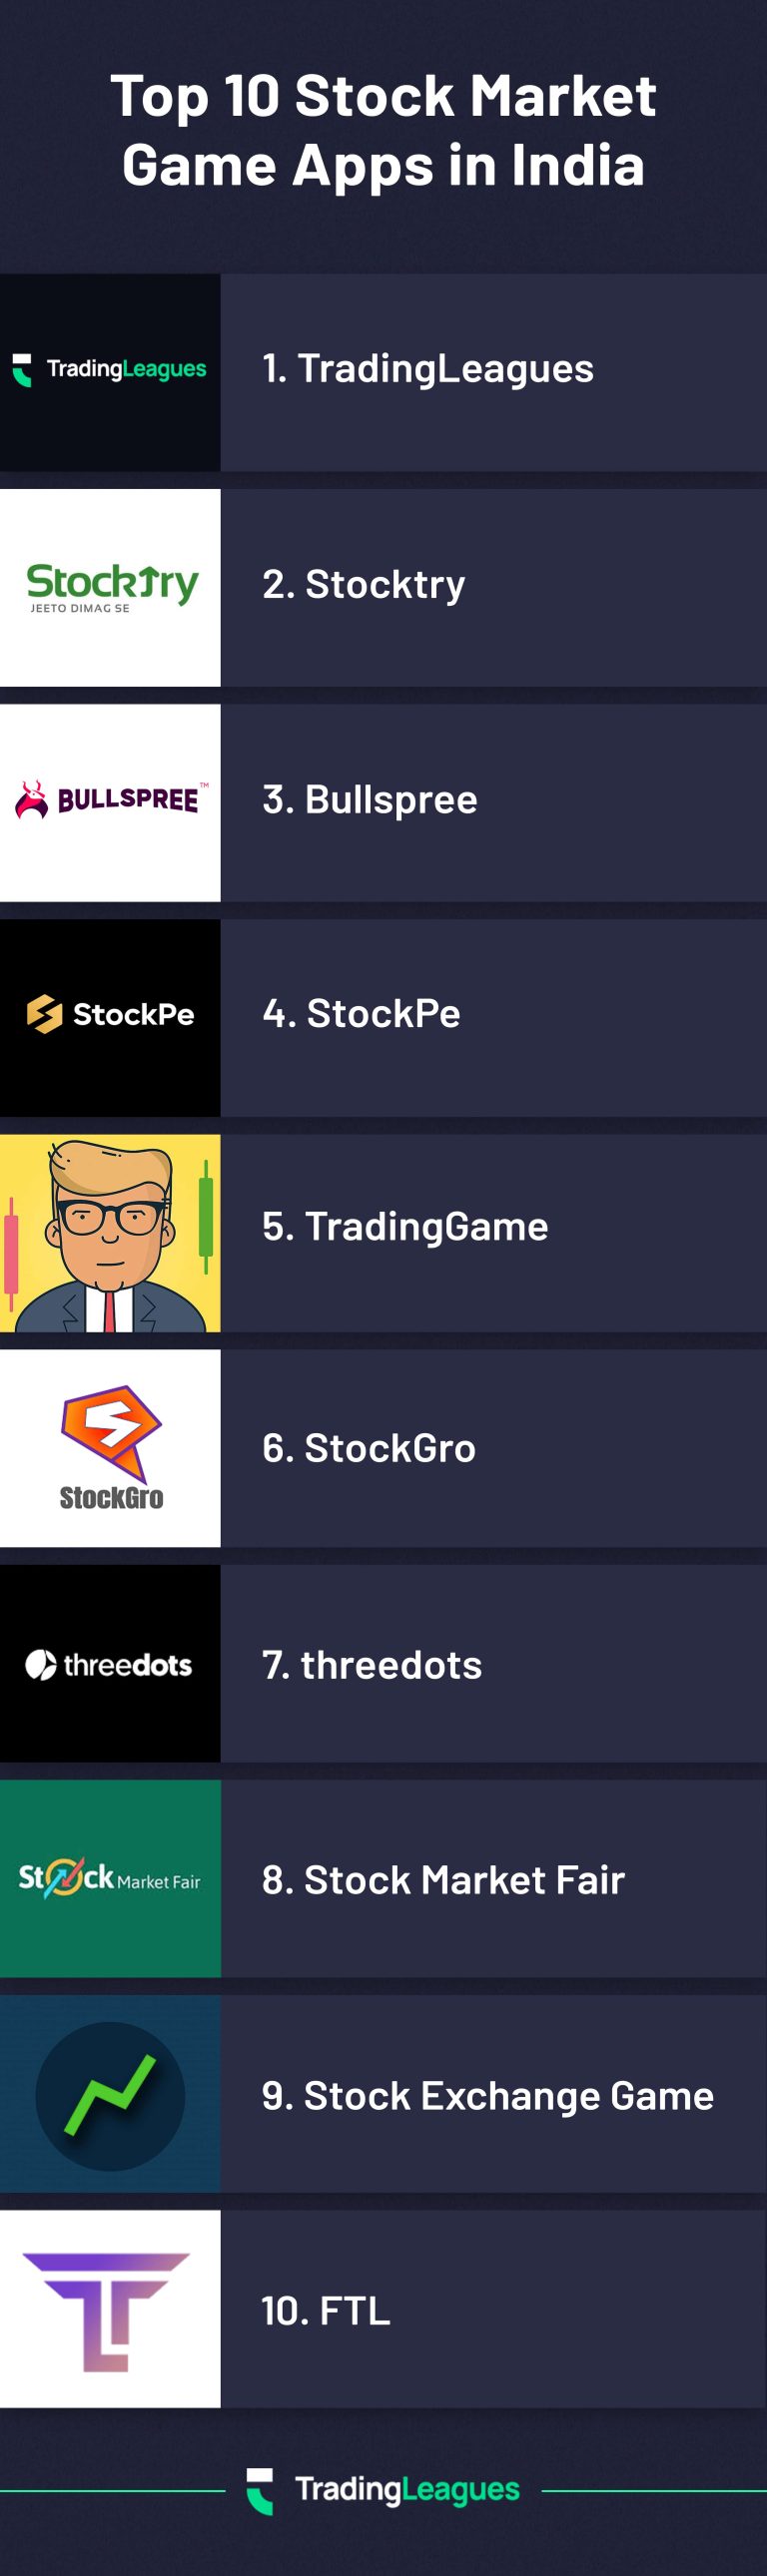 Top Stock Market Game Apps in India - Infographics